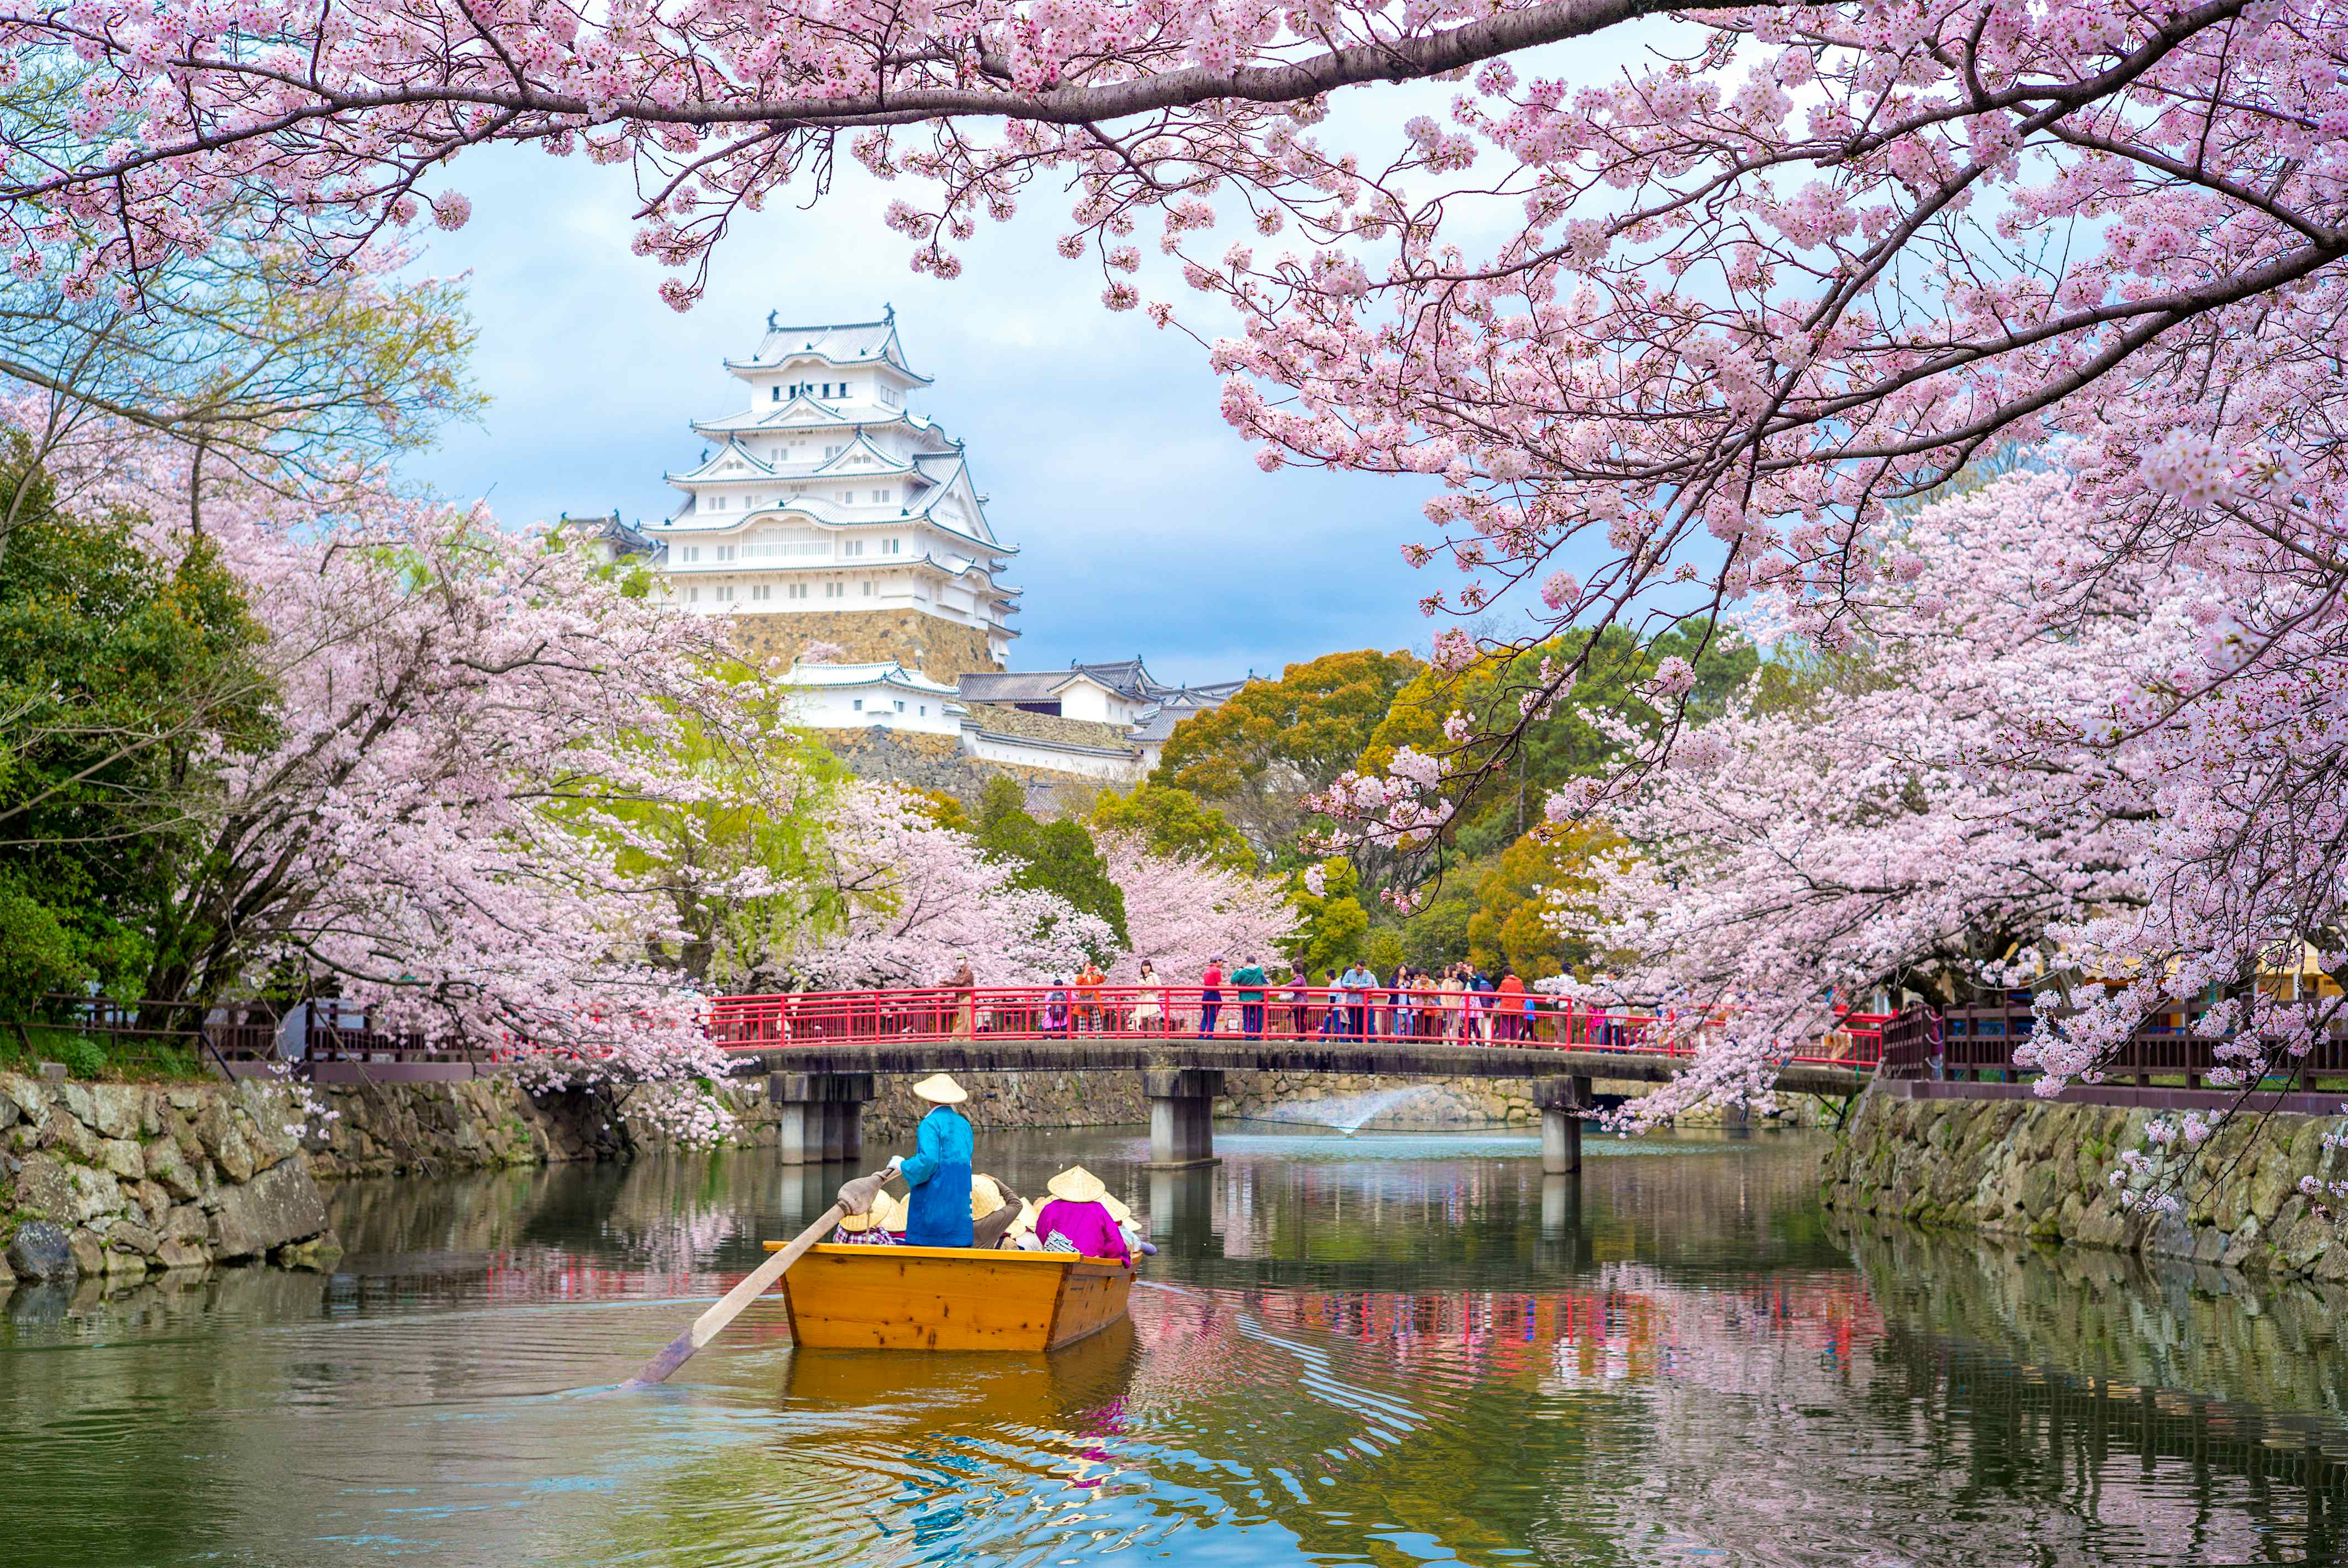 Why Kyoto's cherry blossoms have bloomed unusually early